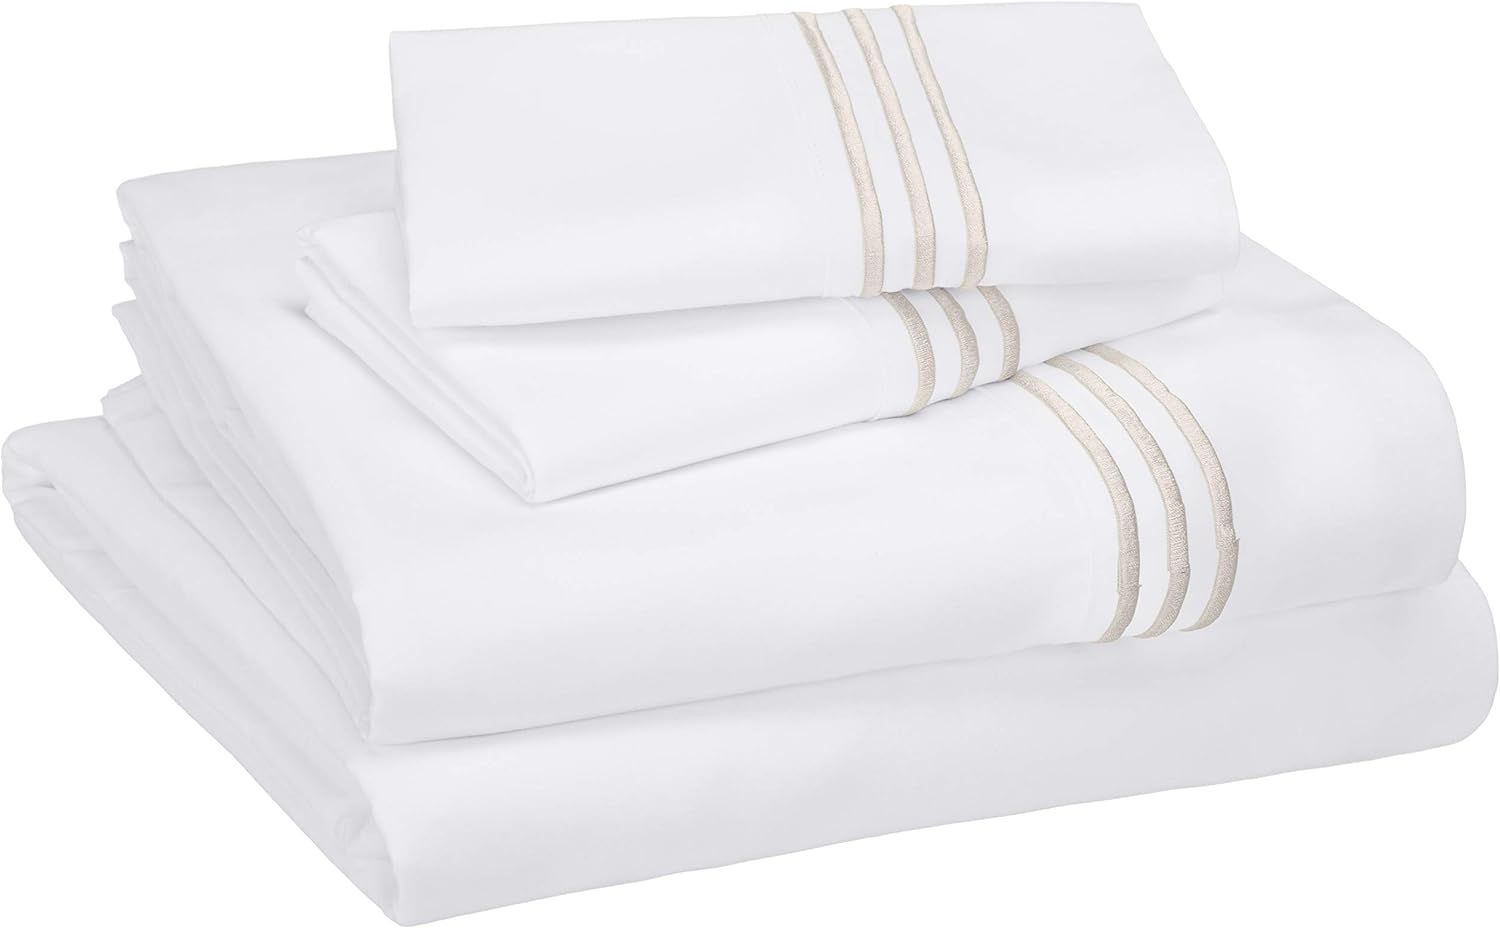 Amazon Basics Premium, Easy-Wash Embroidered Hotel Stitch 120 GSM Sheet Set - Queen, Embroidered ... | Amazon (US)